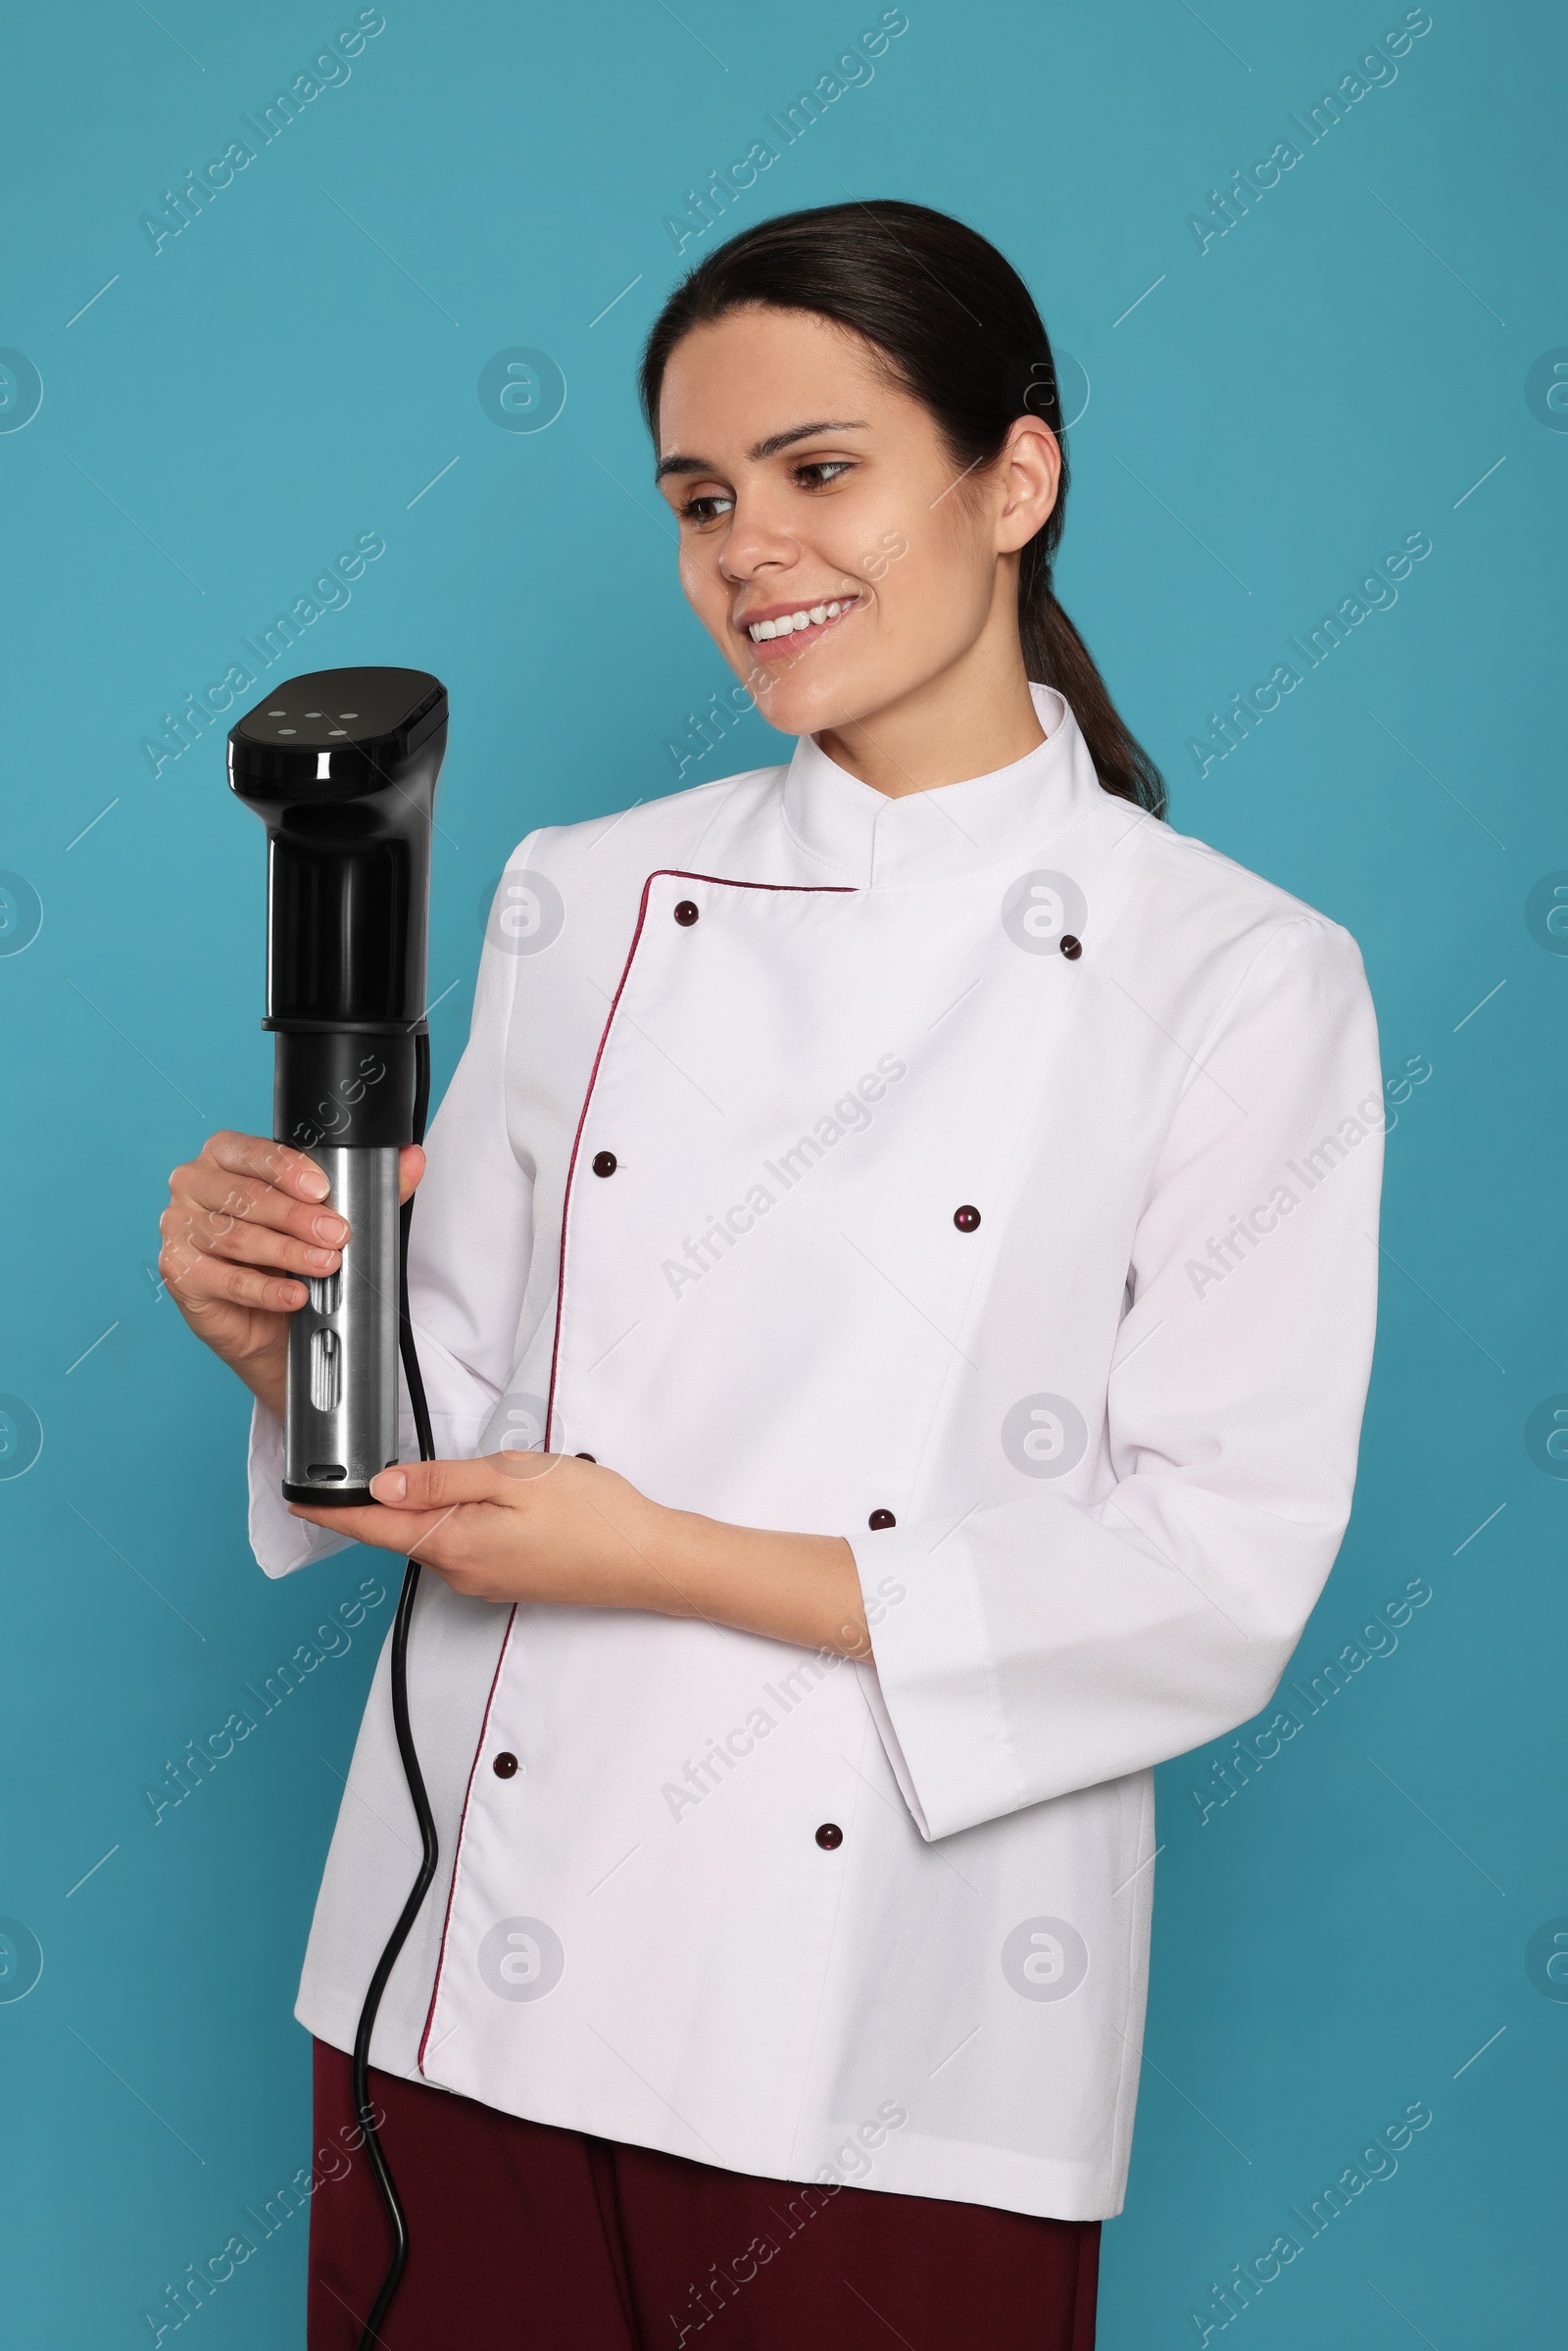 Photo of Chef holding sous vide cooker on light blue background